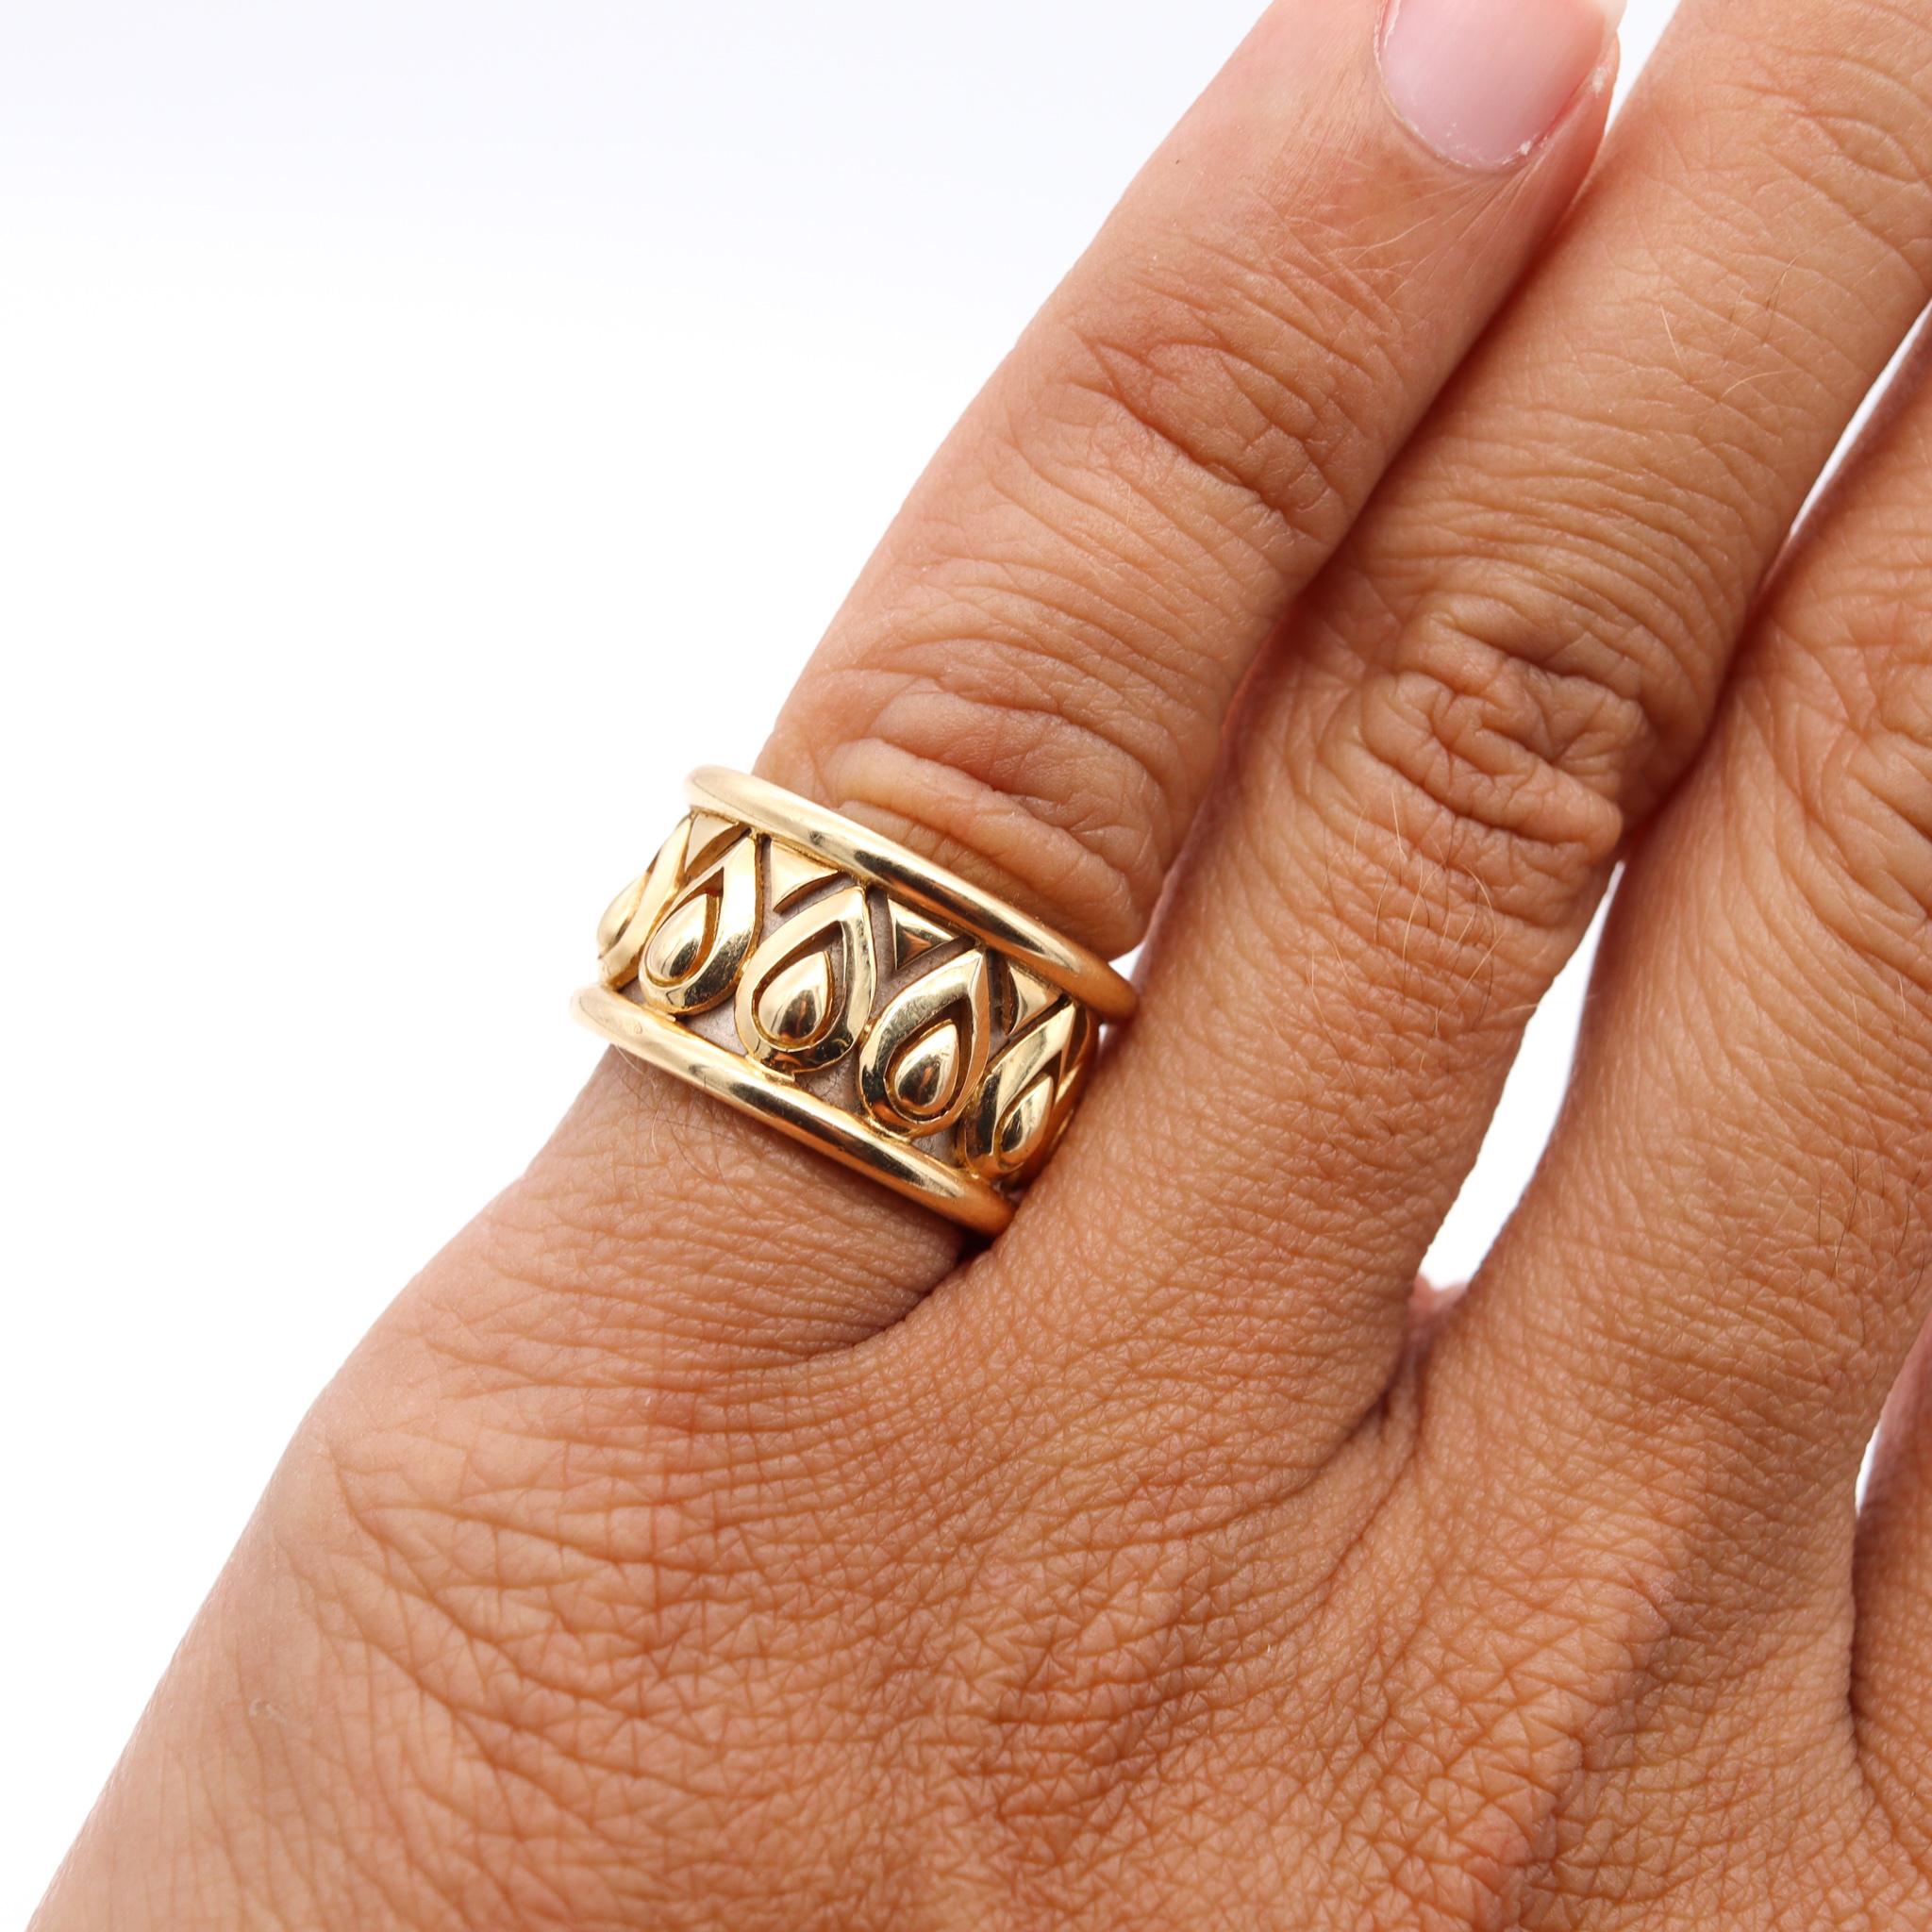 Modern Cartier Paris Rare Tanjore Band Ring in Two Tones of 18Kt Gold